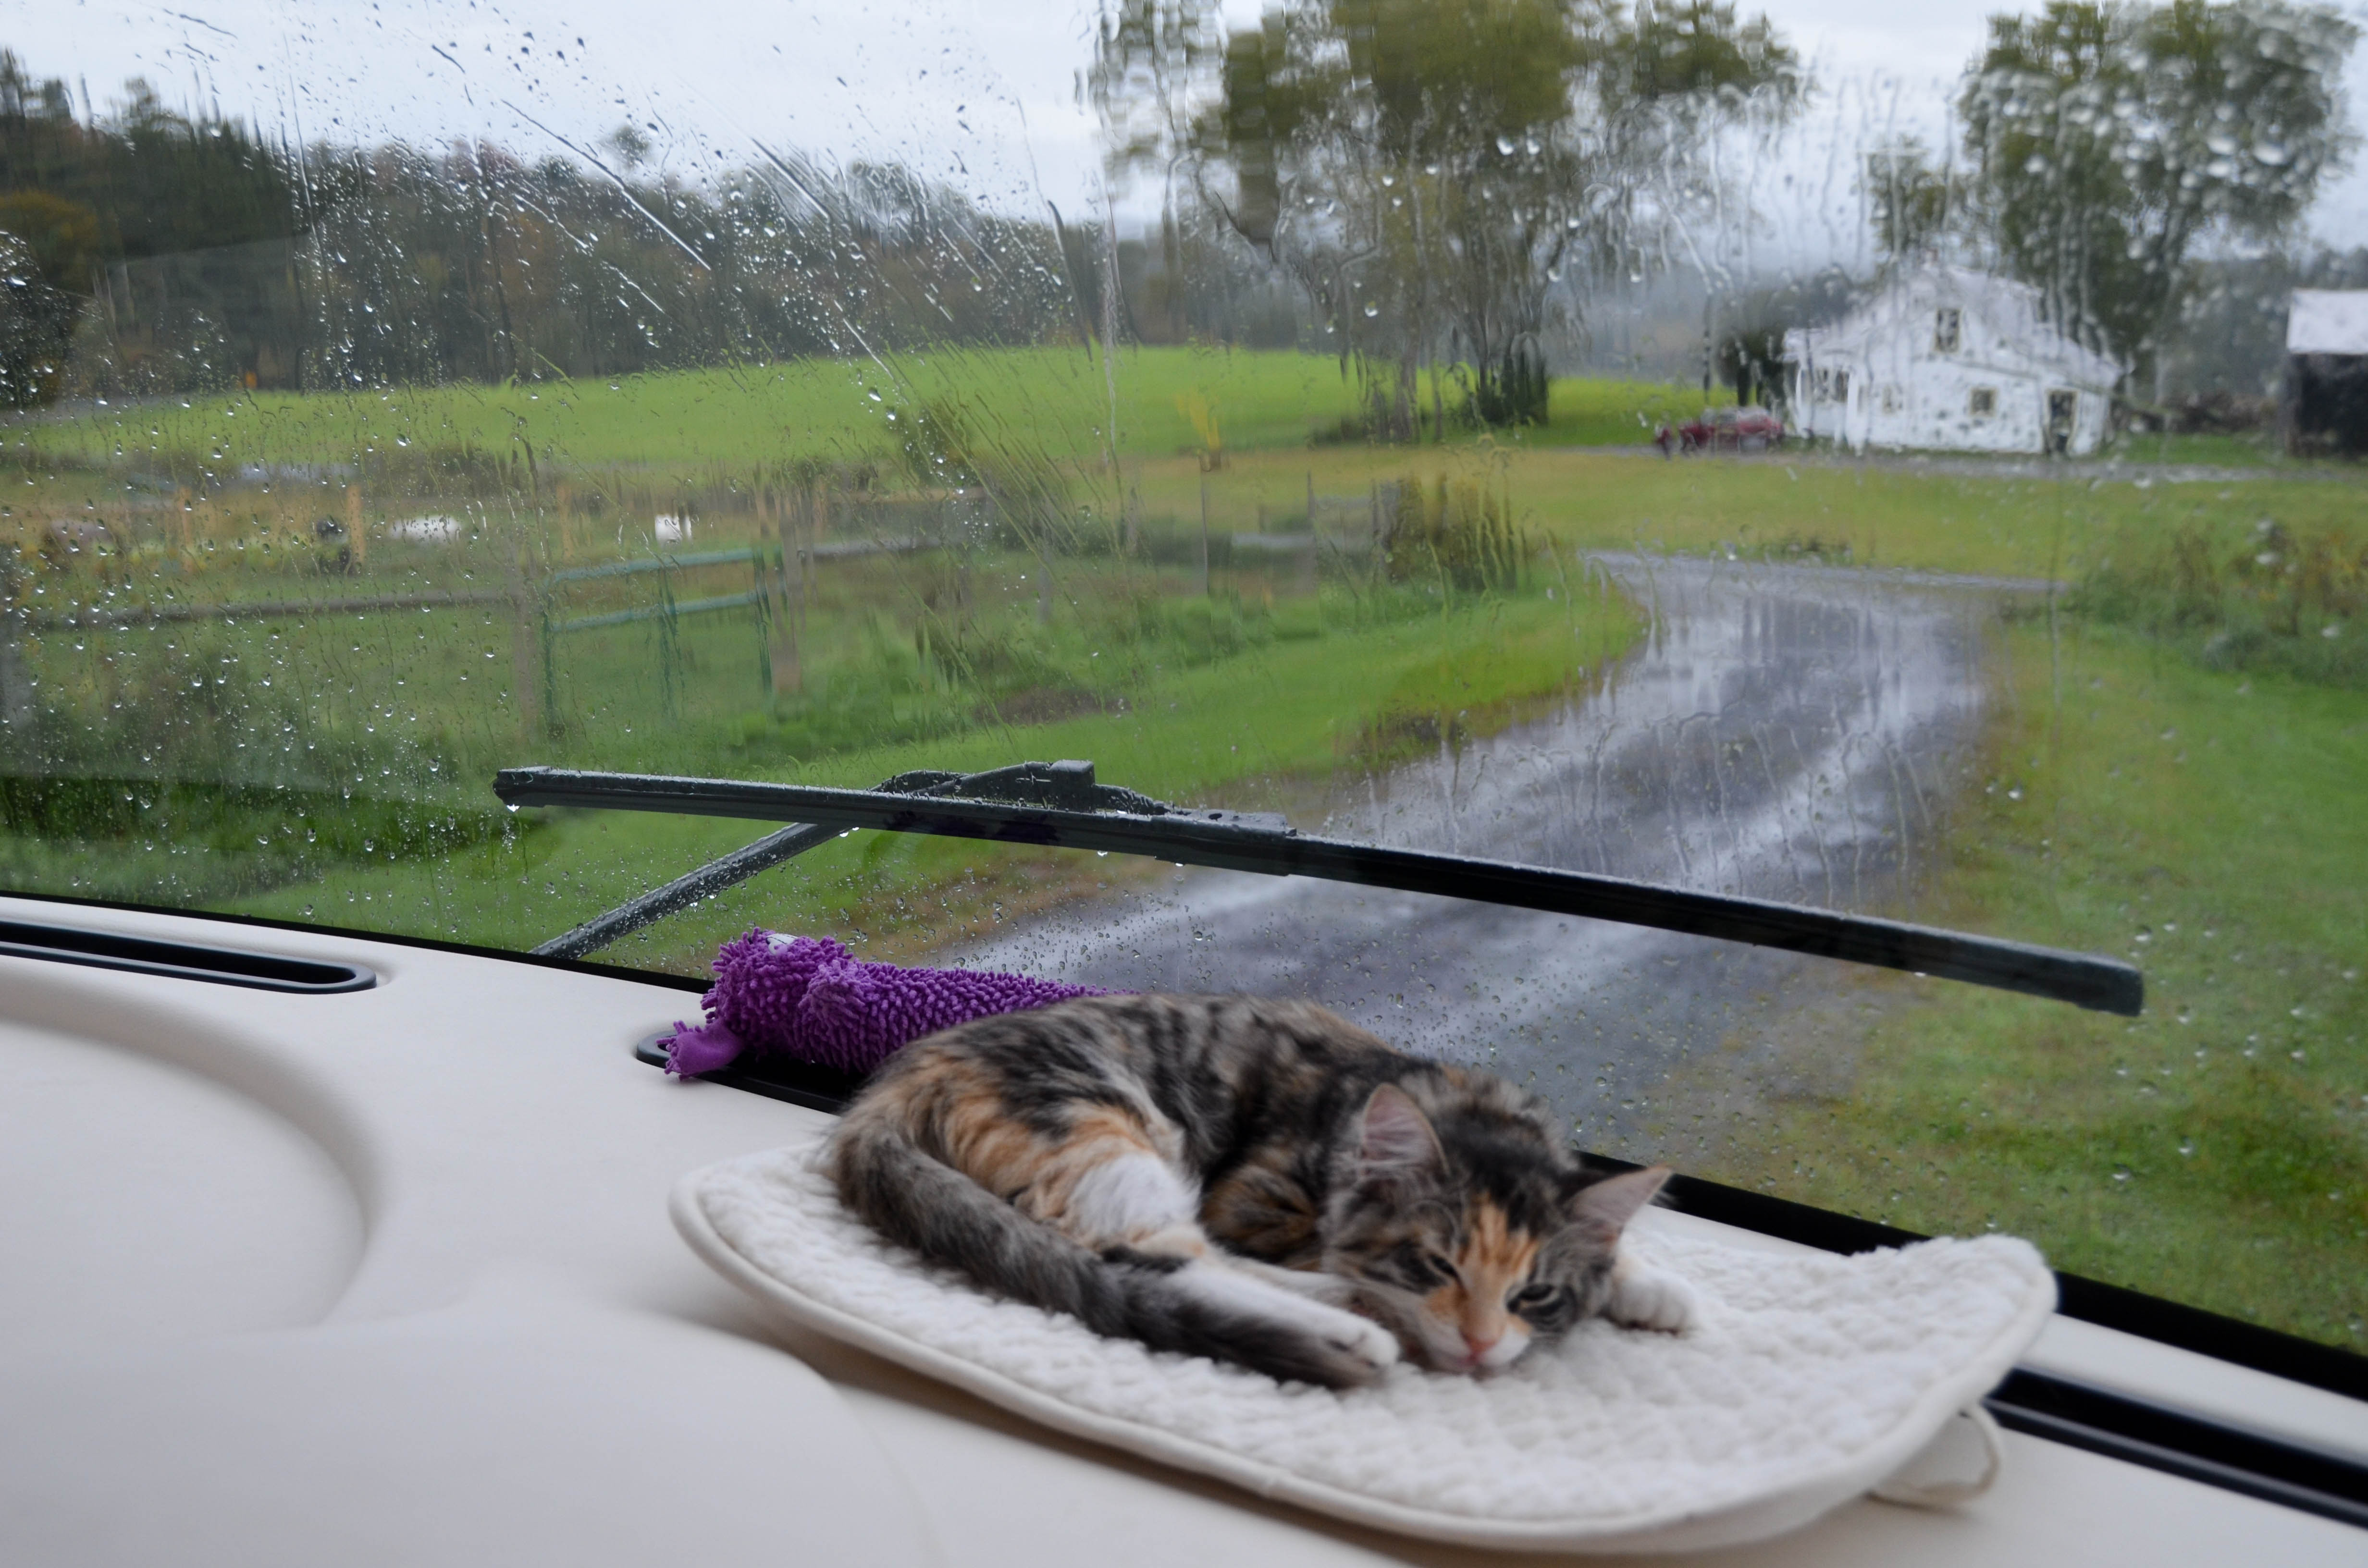 Back in Bessie, it was a cozy rainy day.